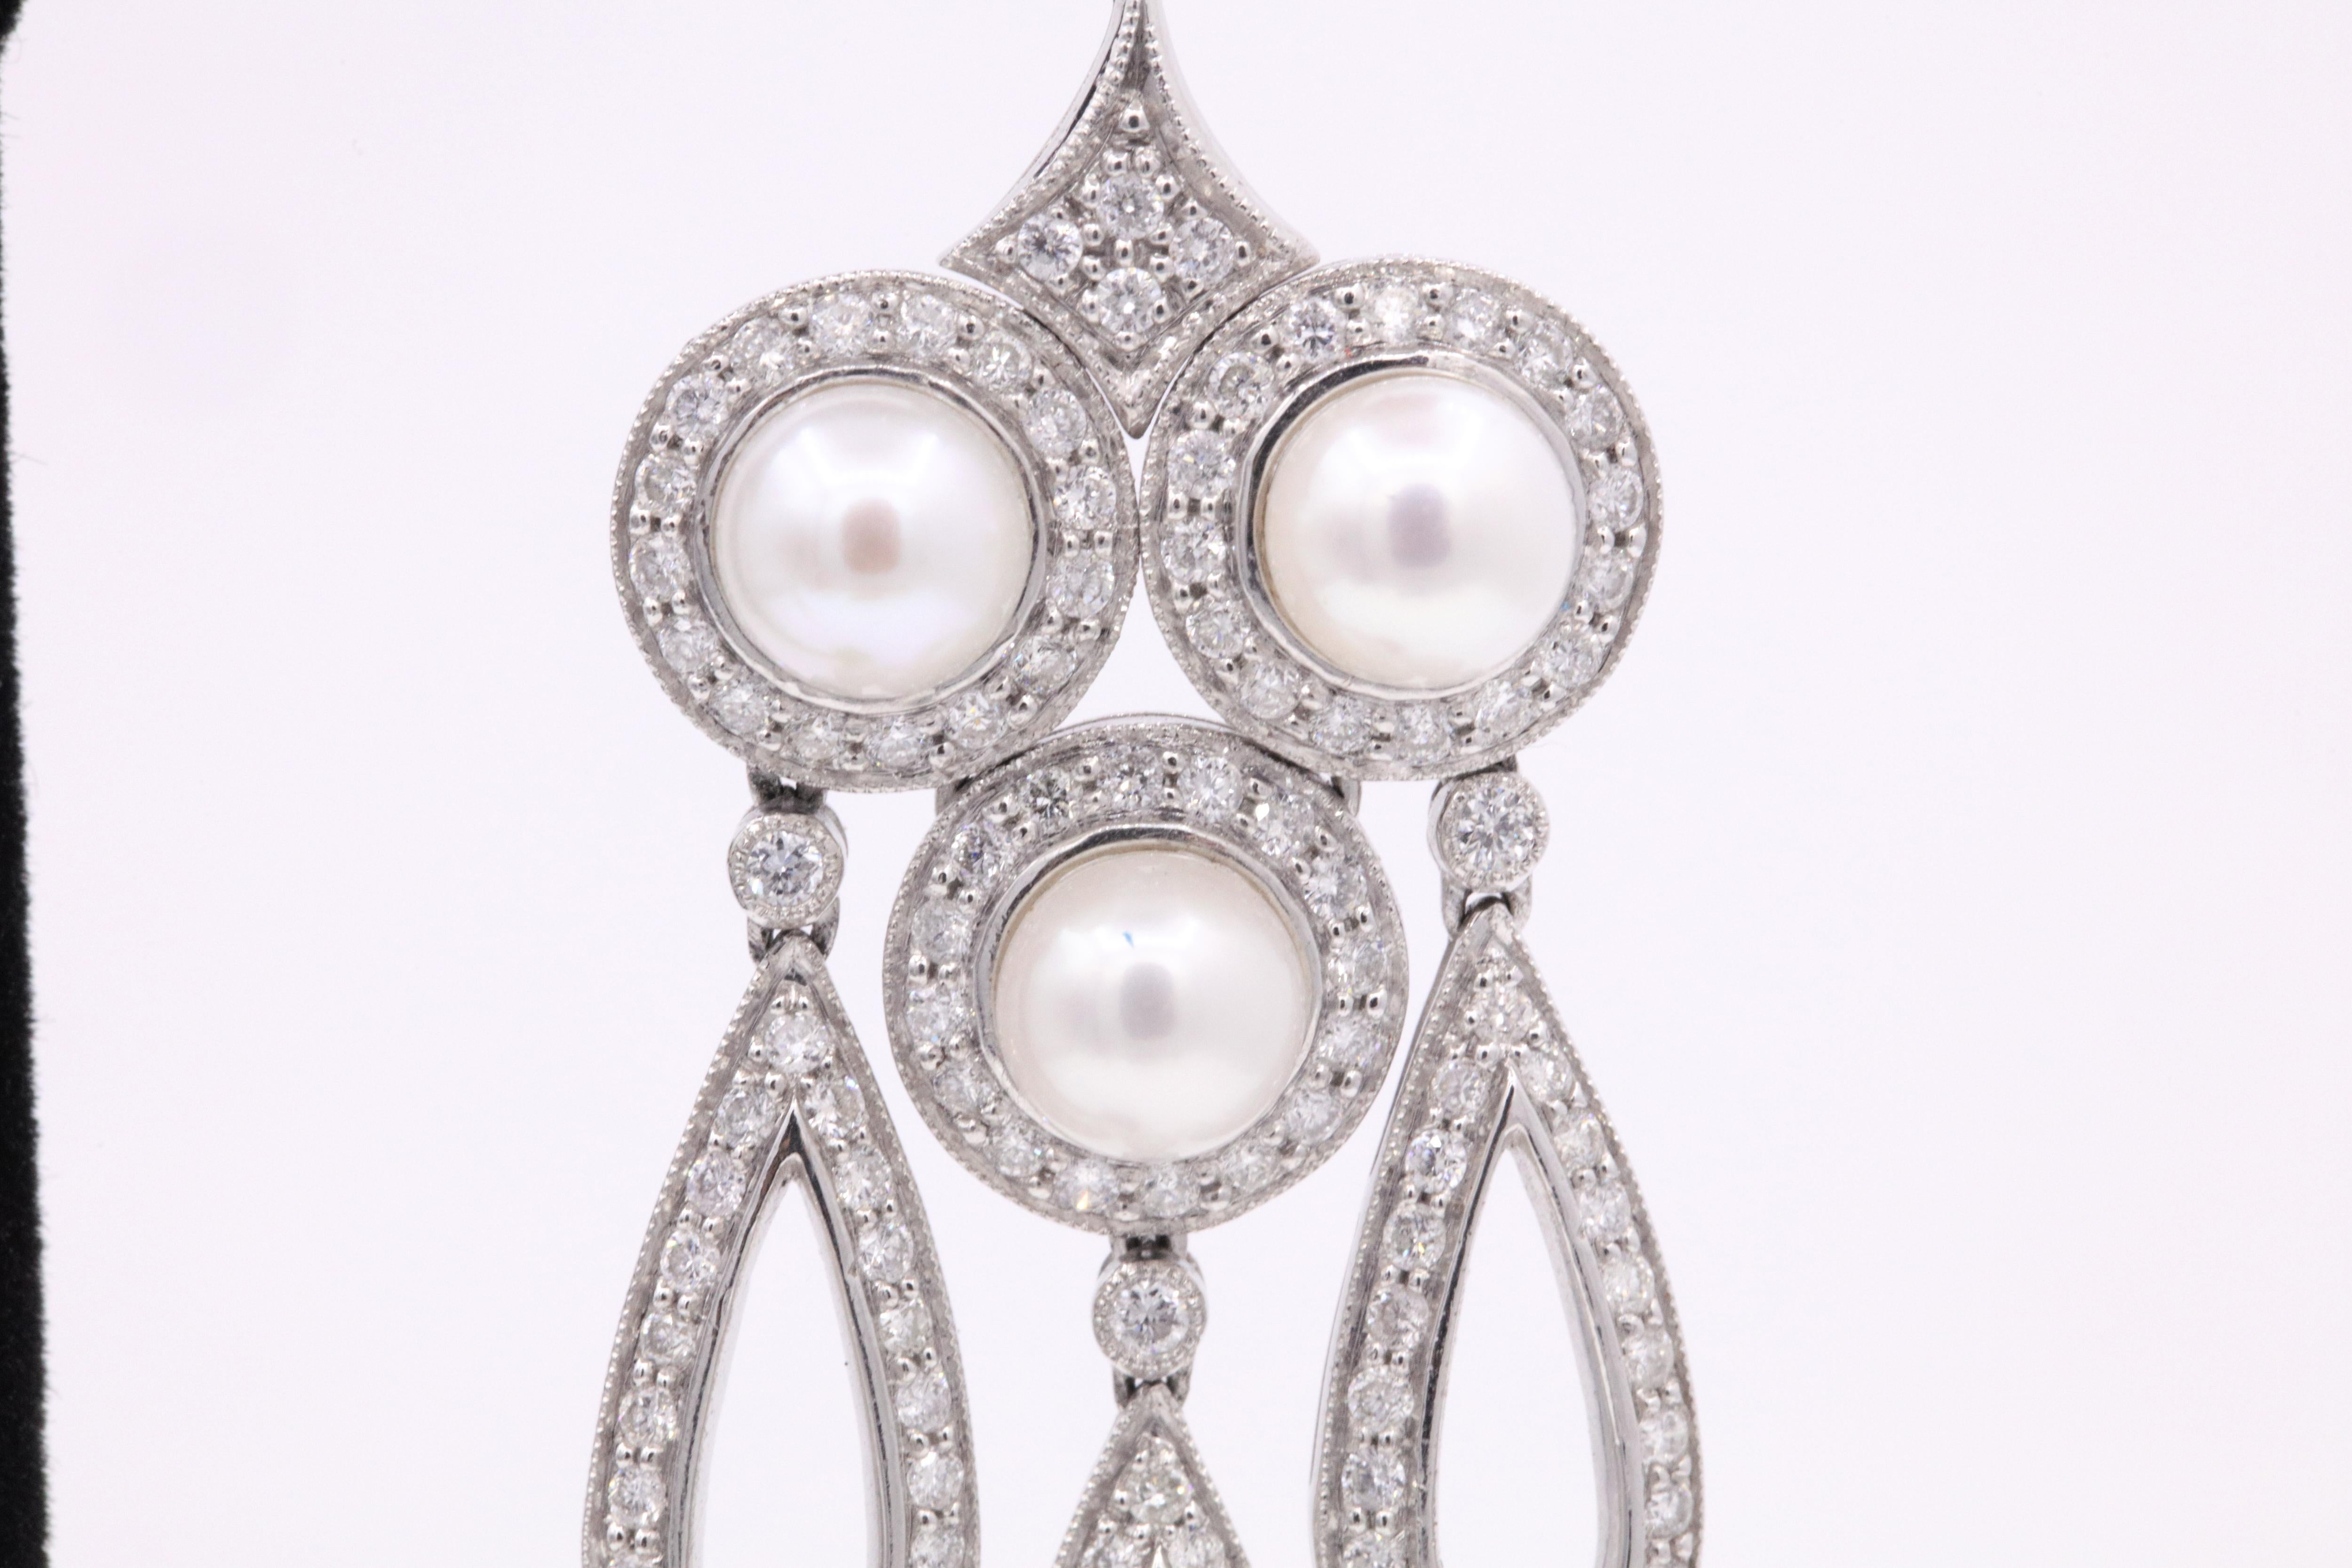 Diamond Pearl Drop Chandelier Earrings 3.13 Carat Platinum In New Condition For Sale In New York, NY